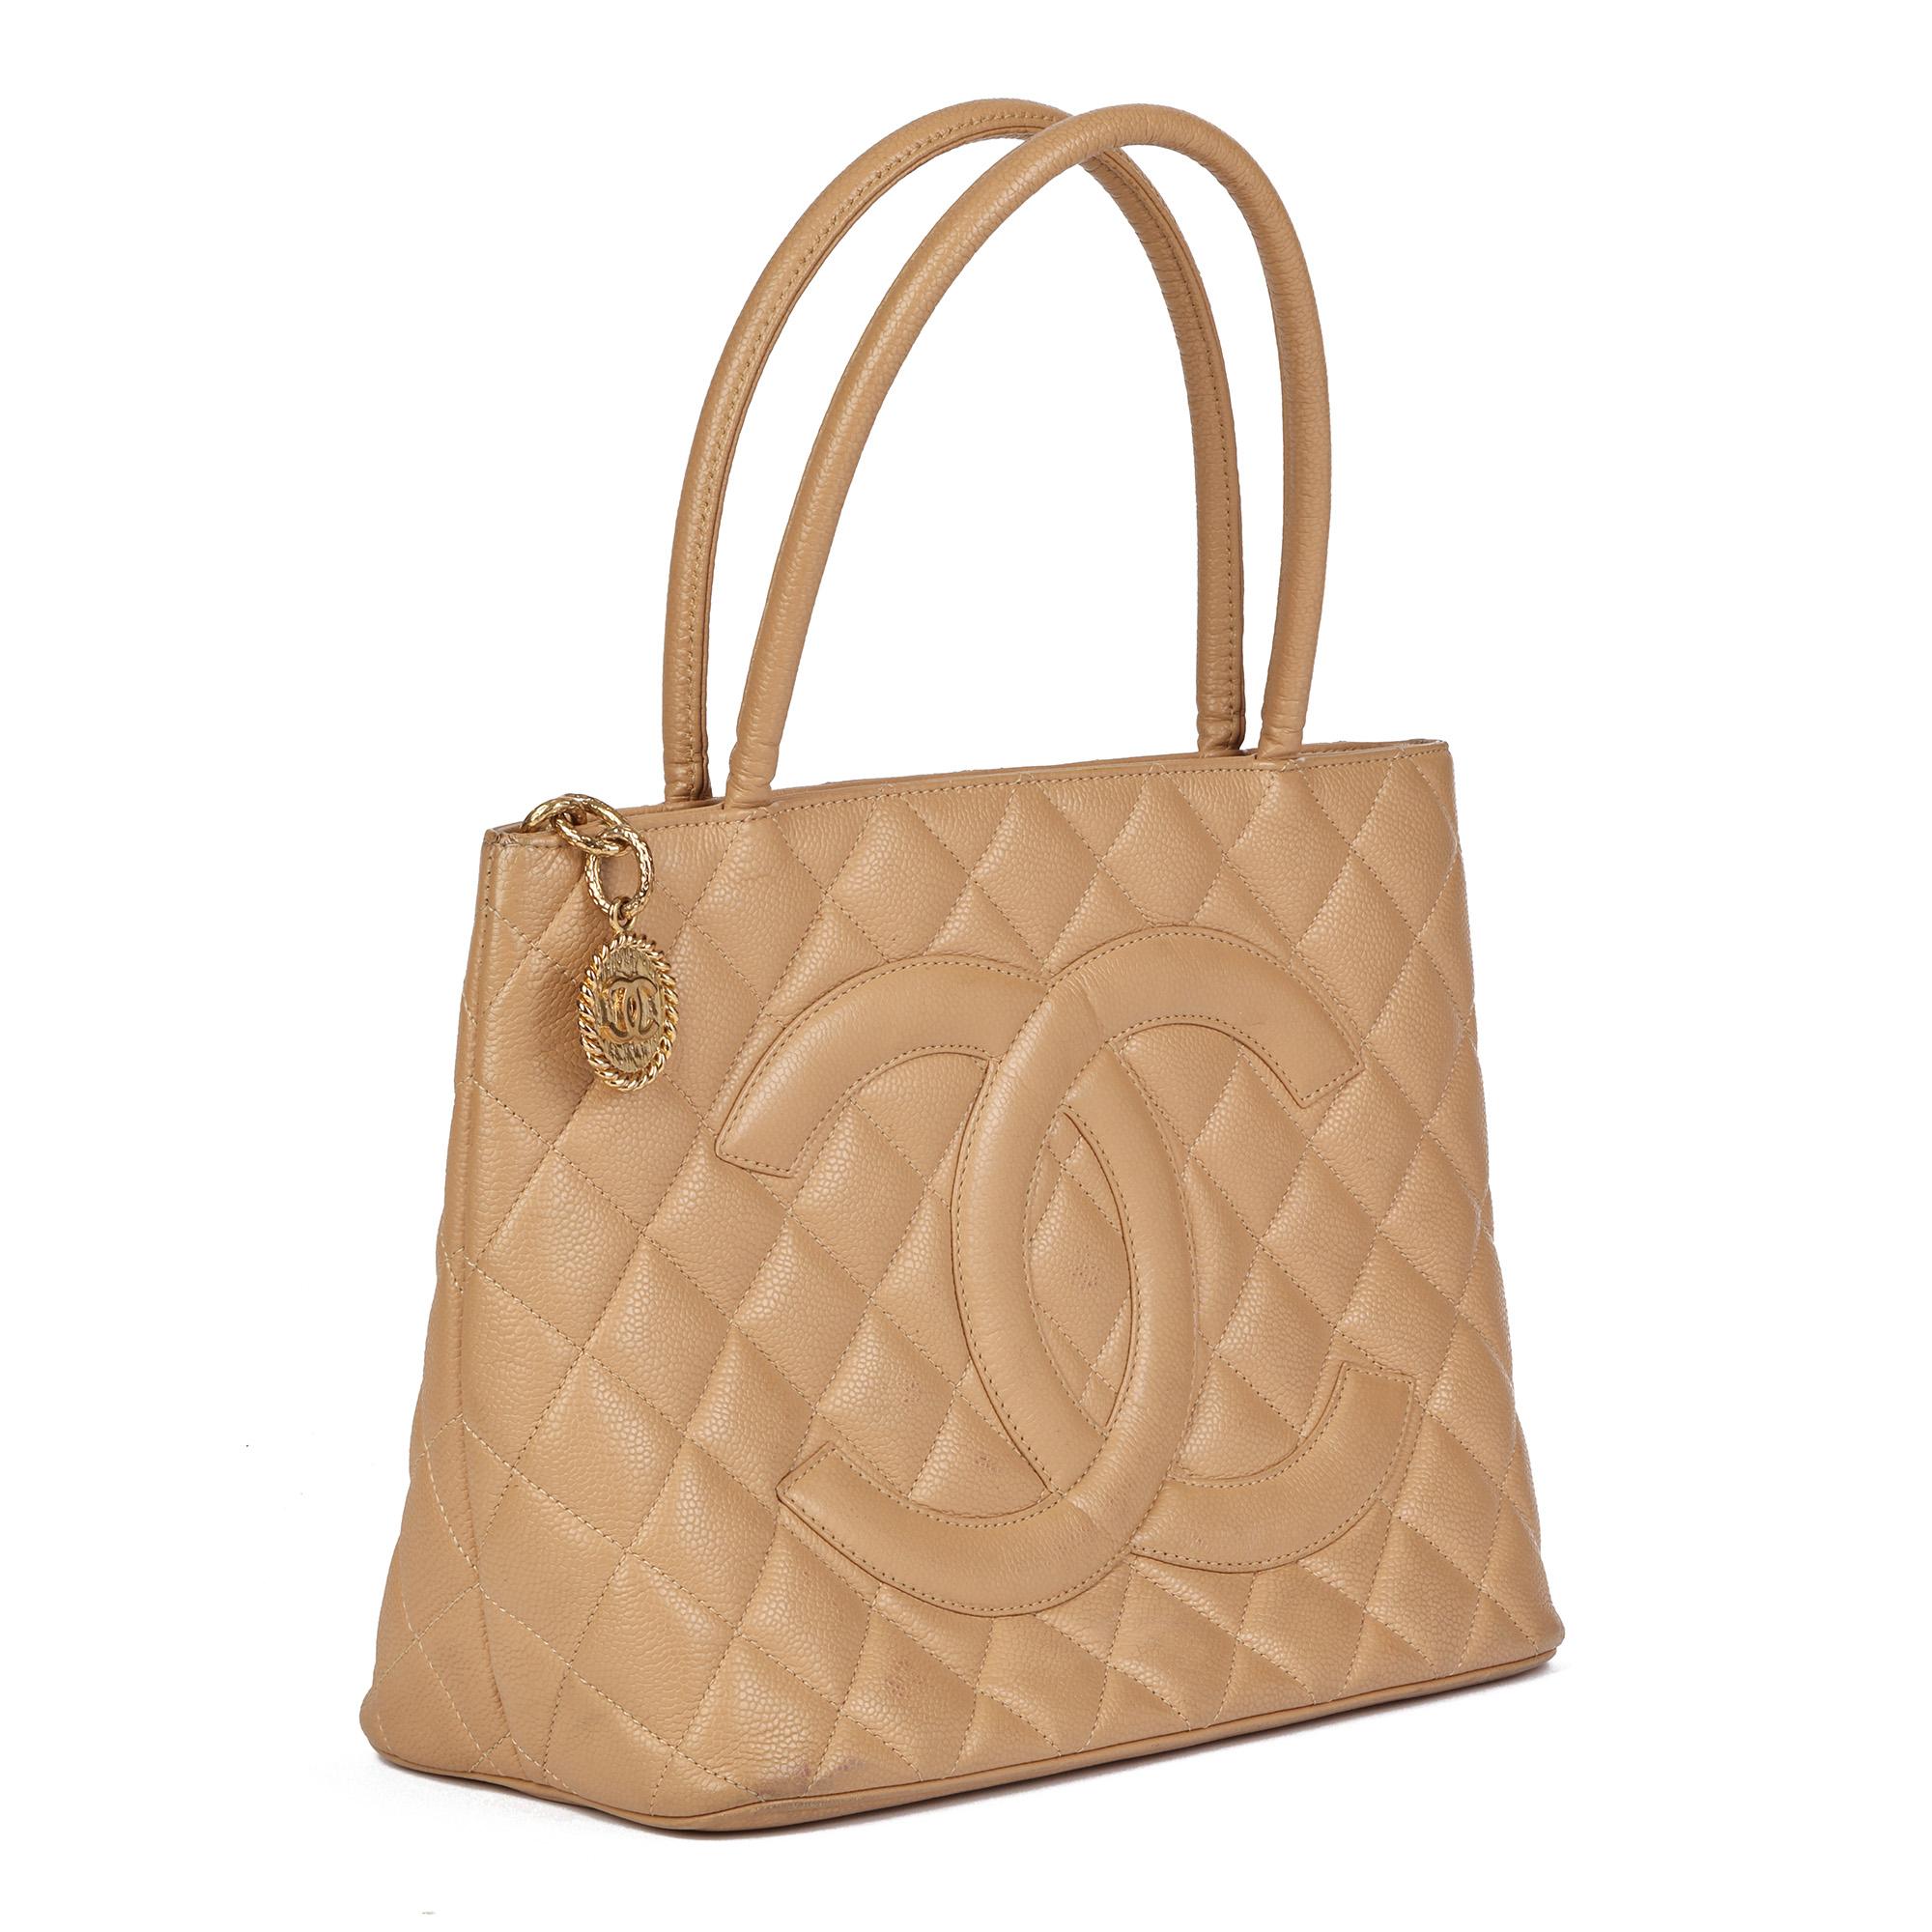 CHANEL
Beige Caviar Leather Medallion Tote 

Serial Number: 11546870
Age (Circa): 2008
Accompanied By: Chanel Dust Bag
Authenticity Details: Serial Sticker (Made in Italy)
Gender: Ladies
Type: Tote

Colour: Beige
Hardware: Gold
Material(s): Caviar